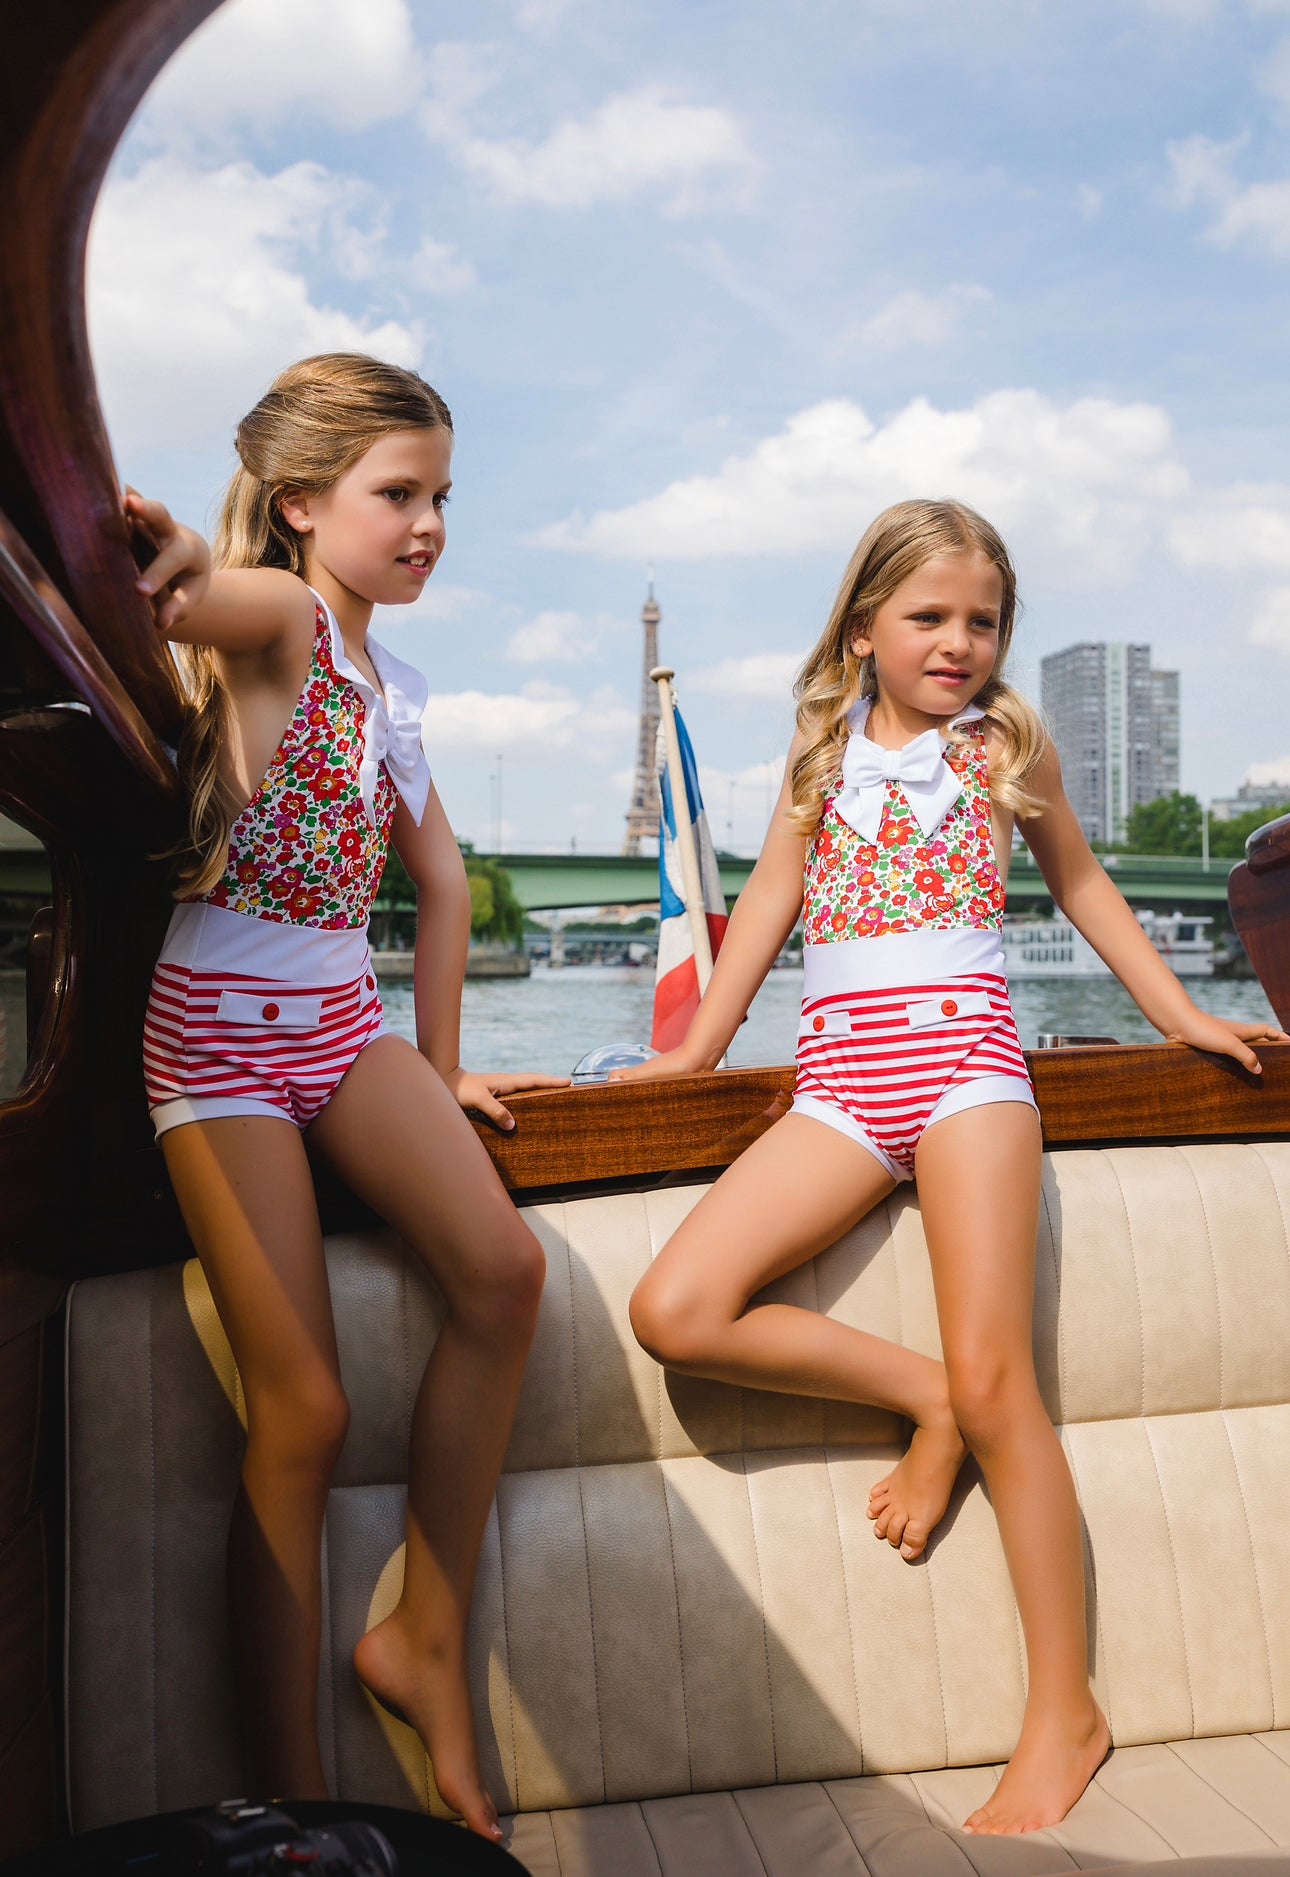 Red Betsy Sailor Swimsuit (2T,4T)